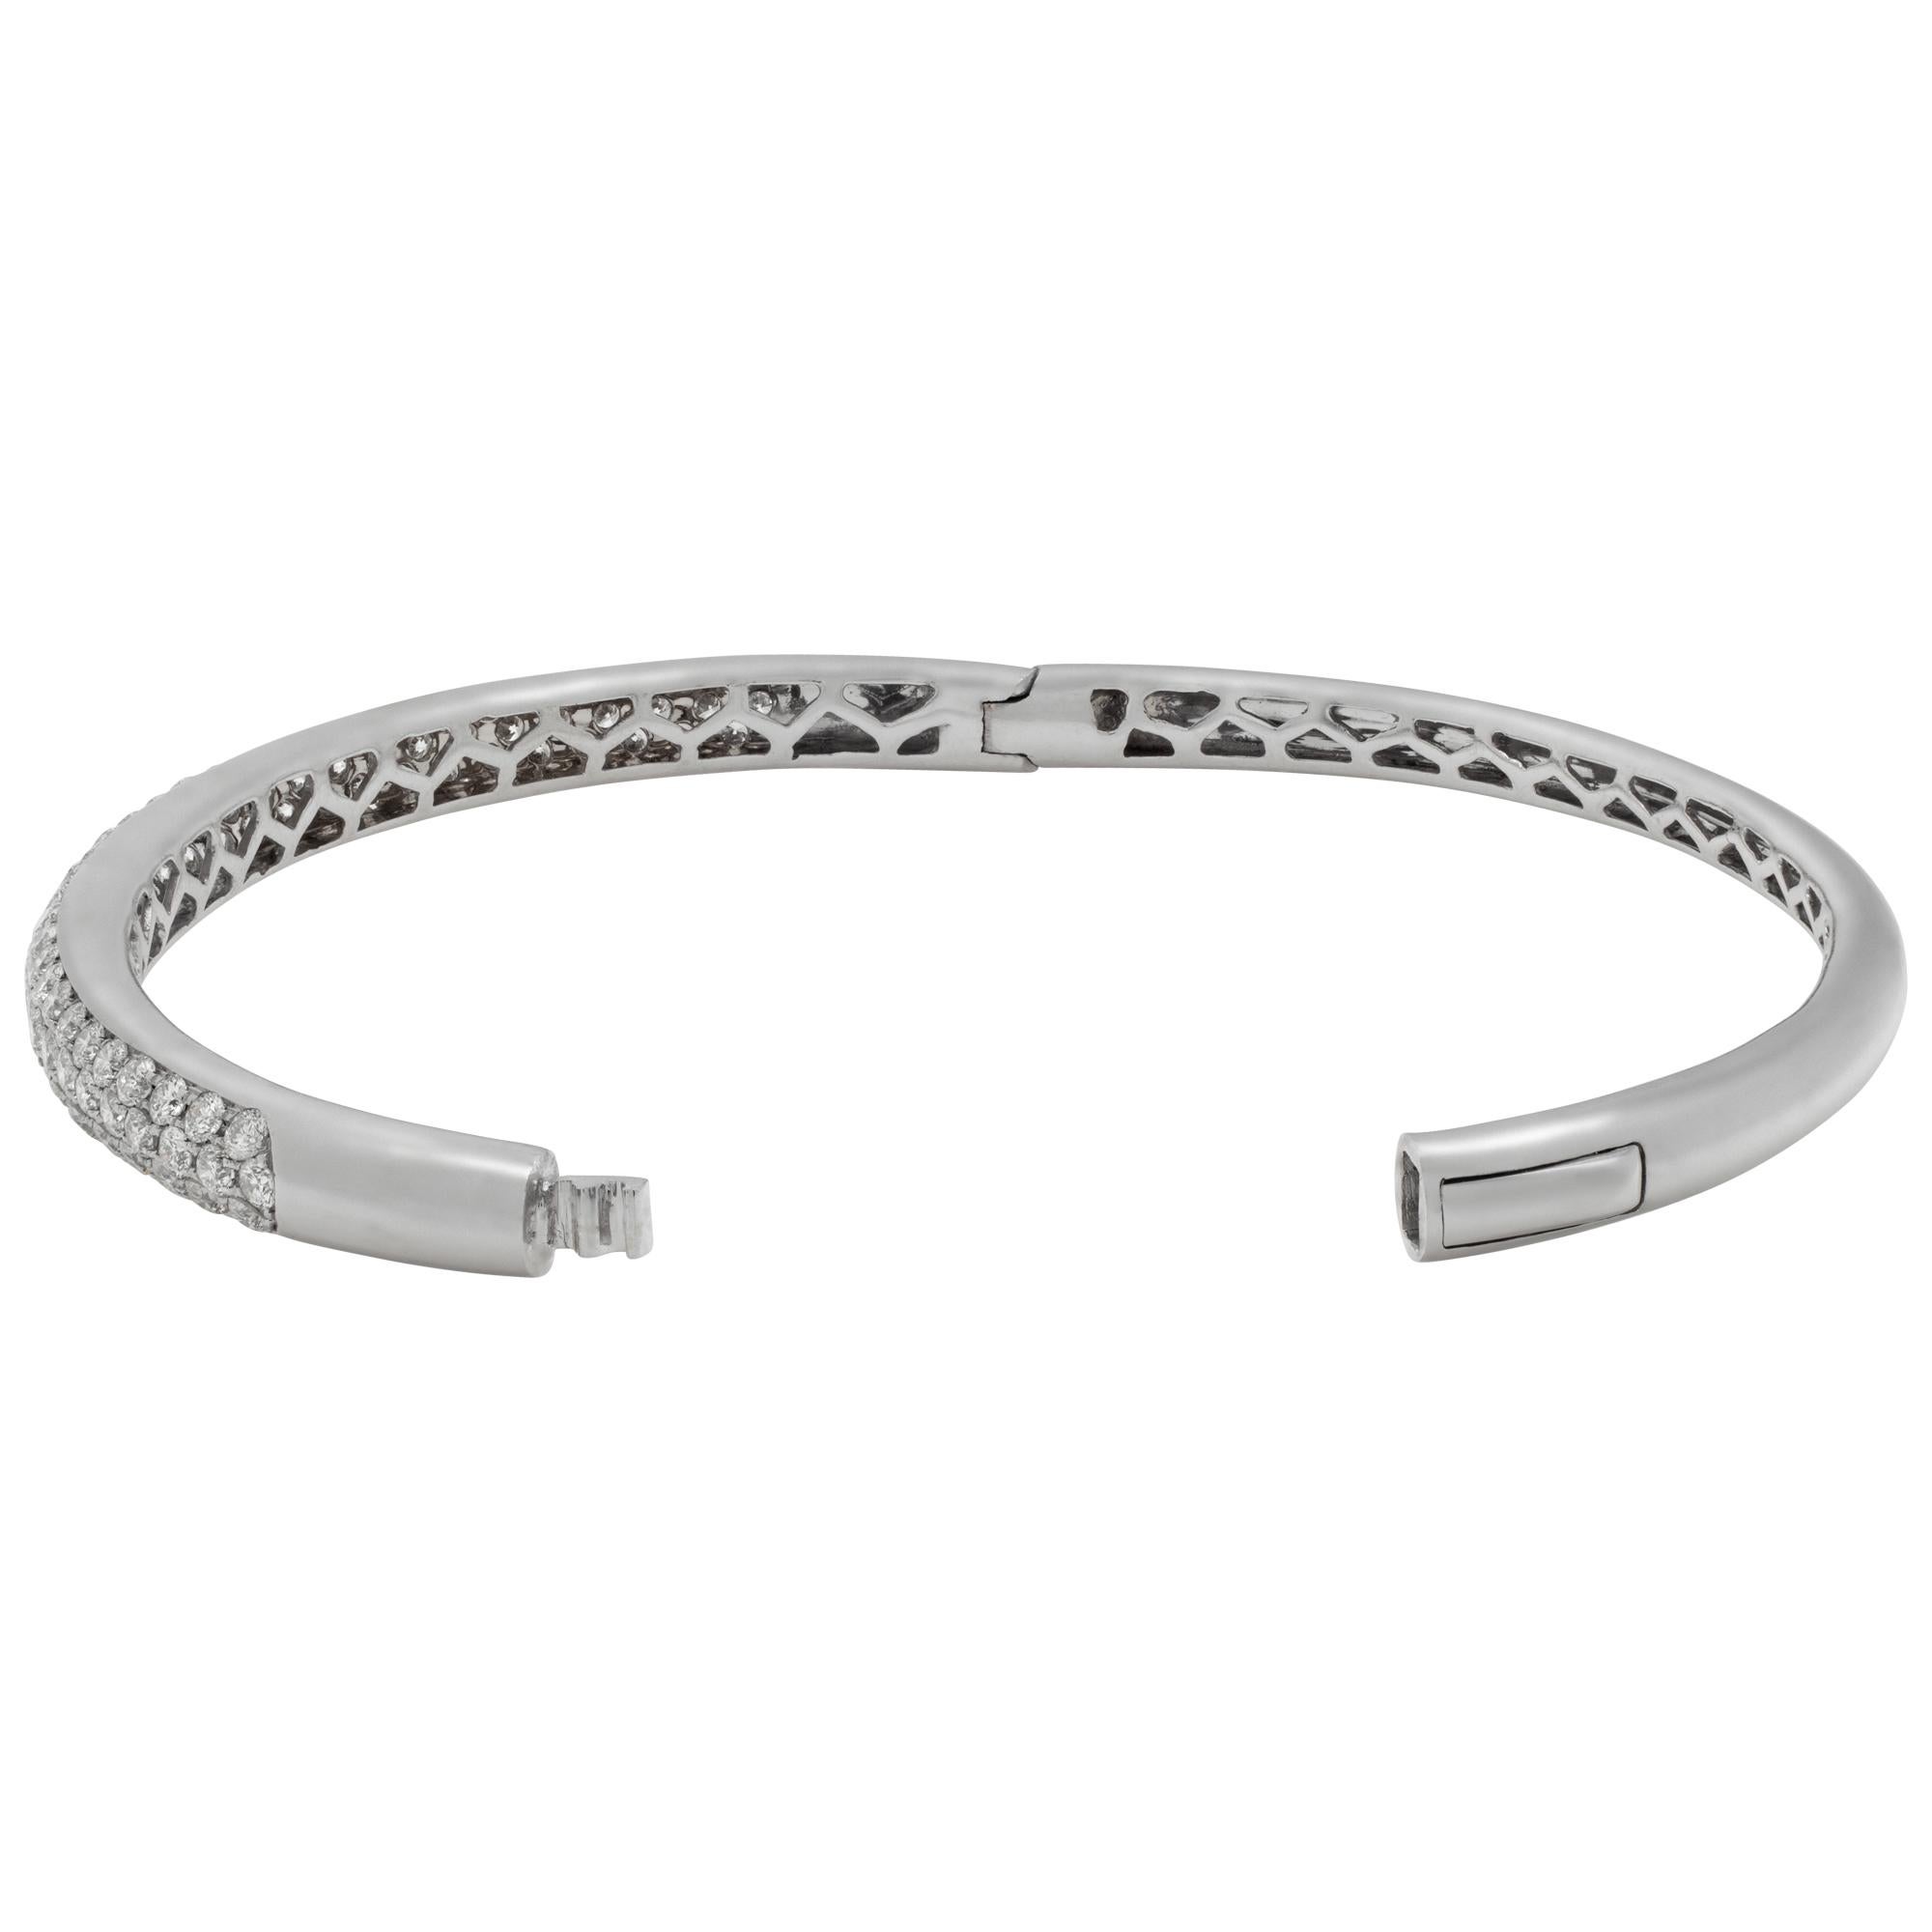 Diamond semi eternity bangle in 18k white gold with 2.80 carats in round cut brilliant diamonds (G-H Color, VS Clarity). Fits wrists up to 7 inches.
